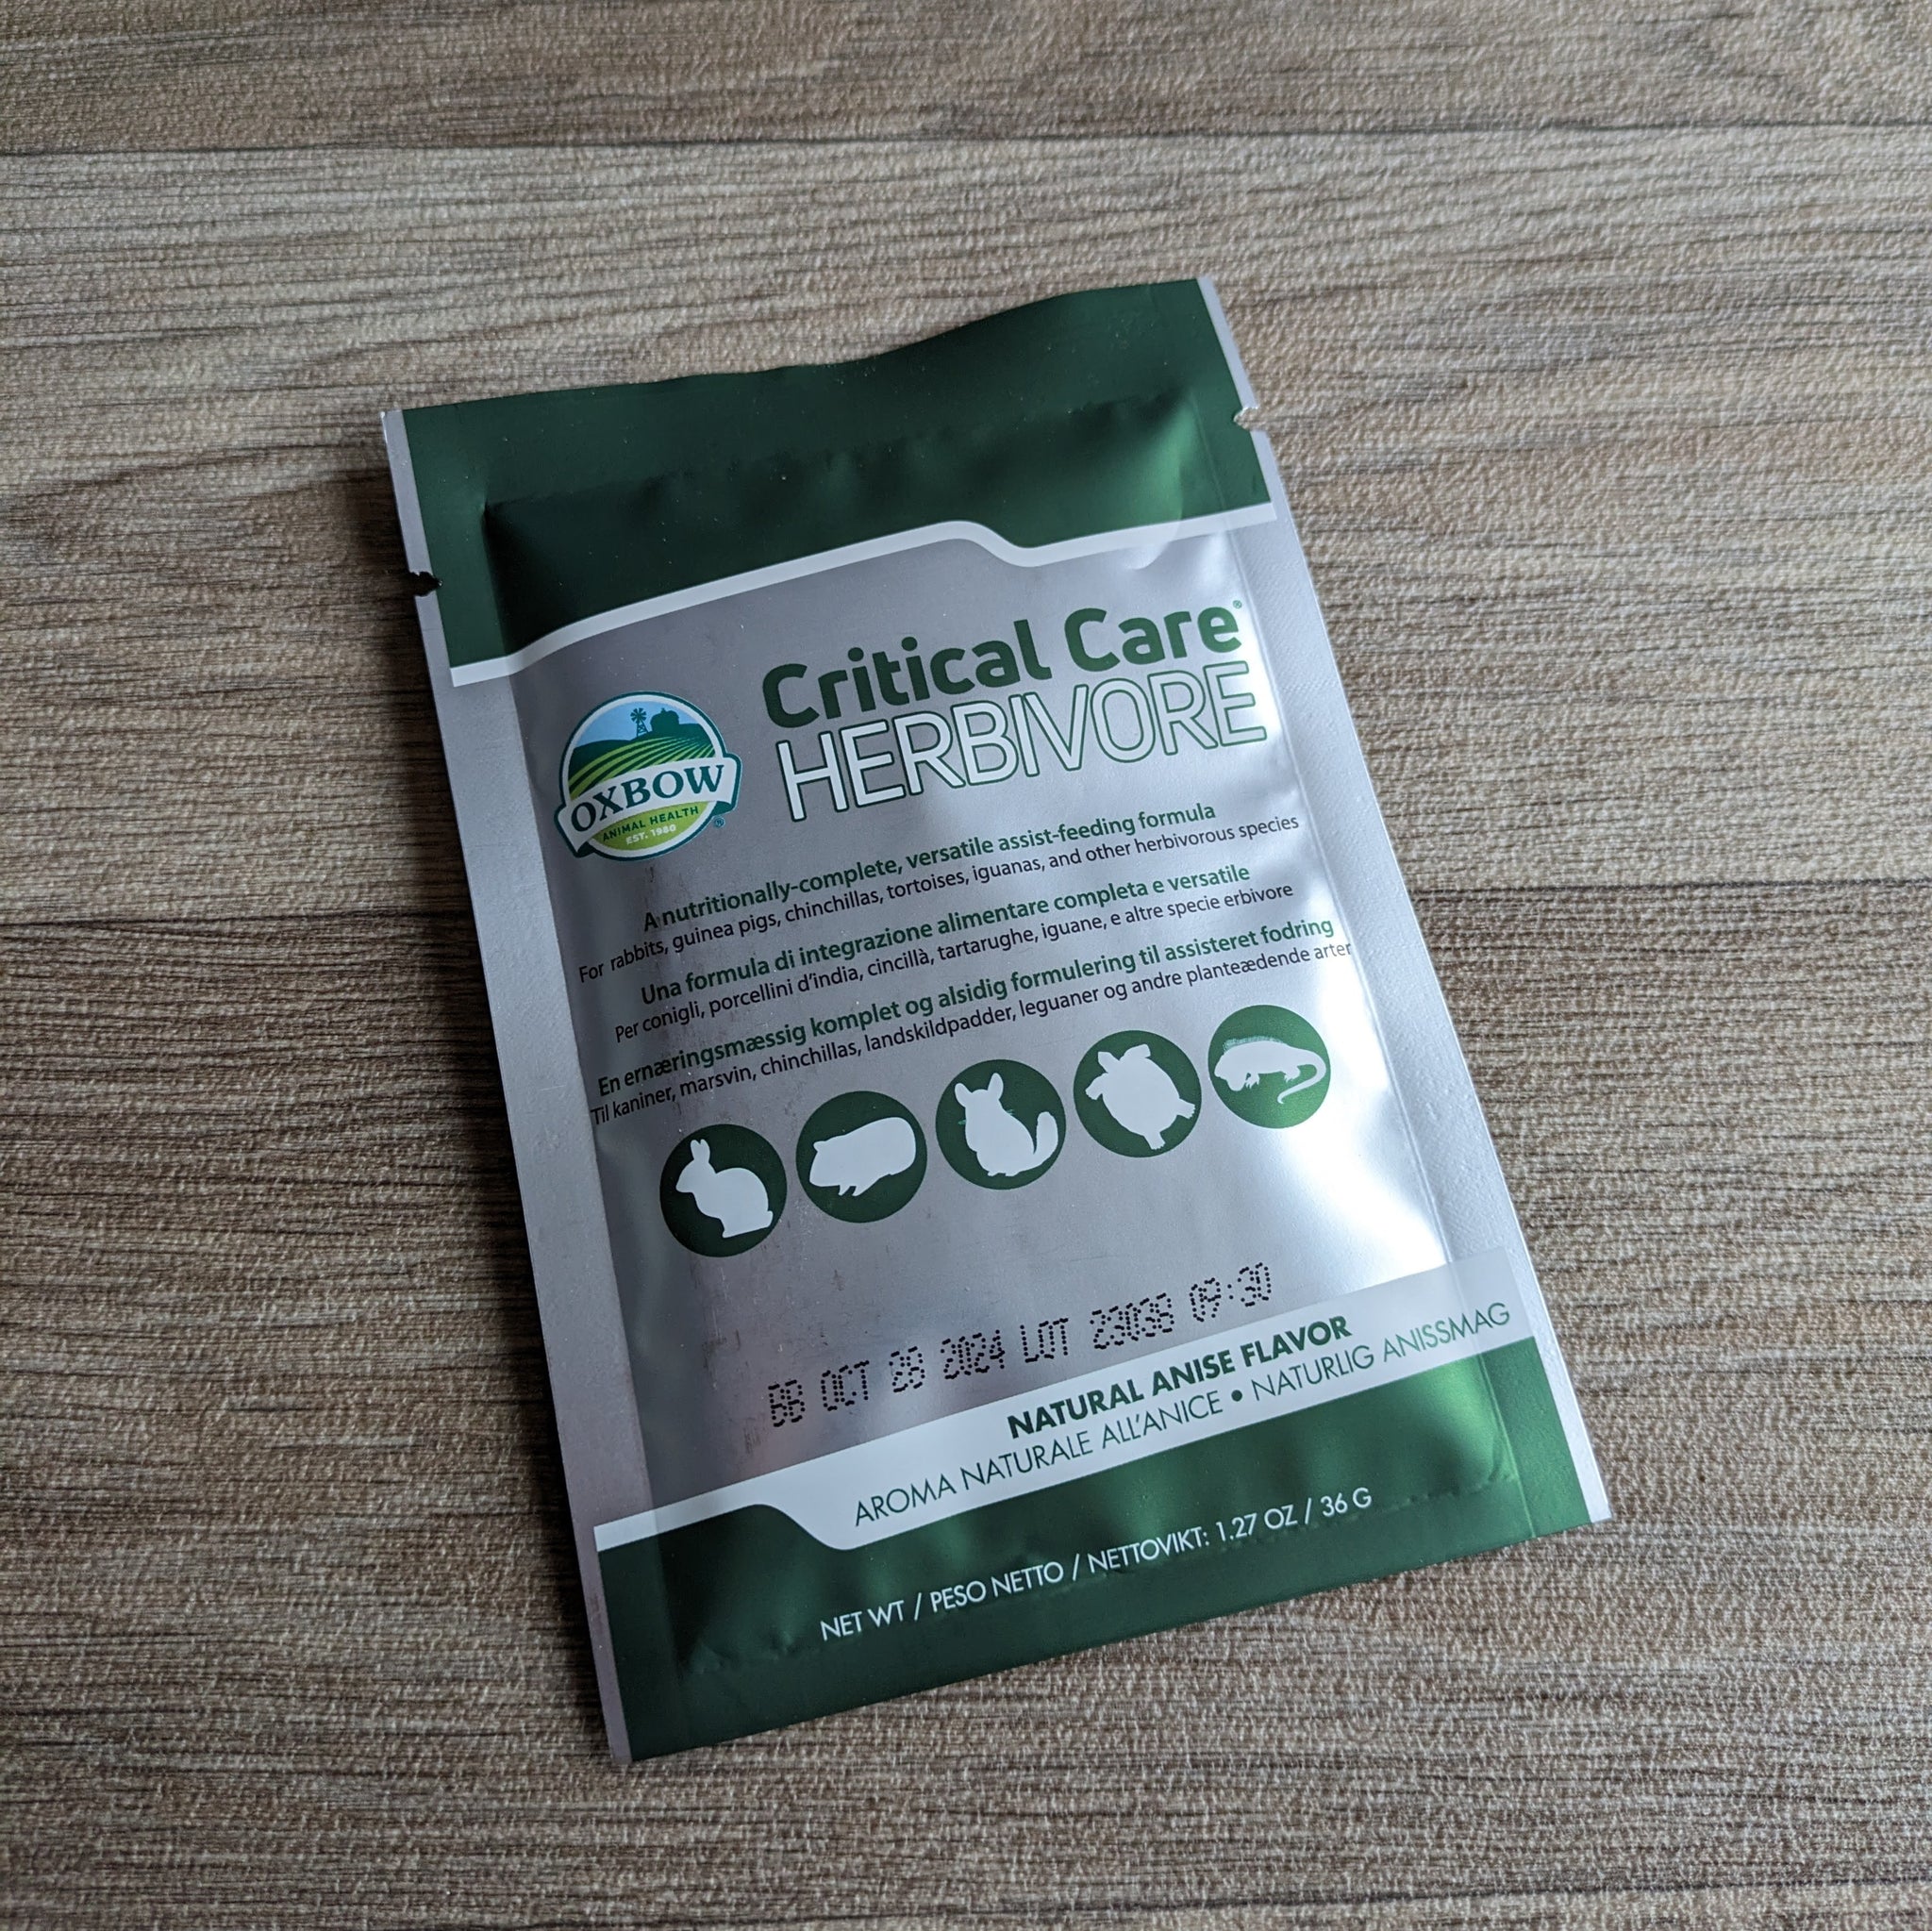 Oxbow Critical Care Feed for Herbivores 36g